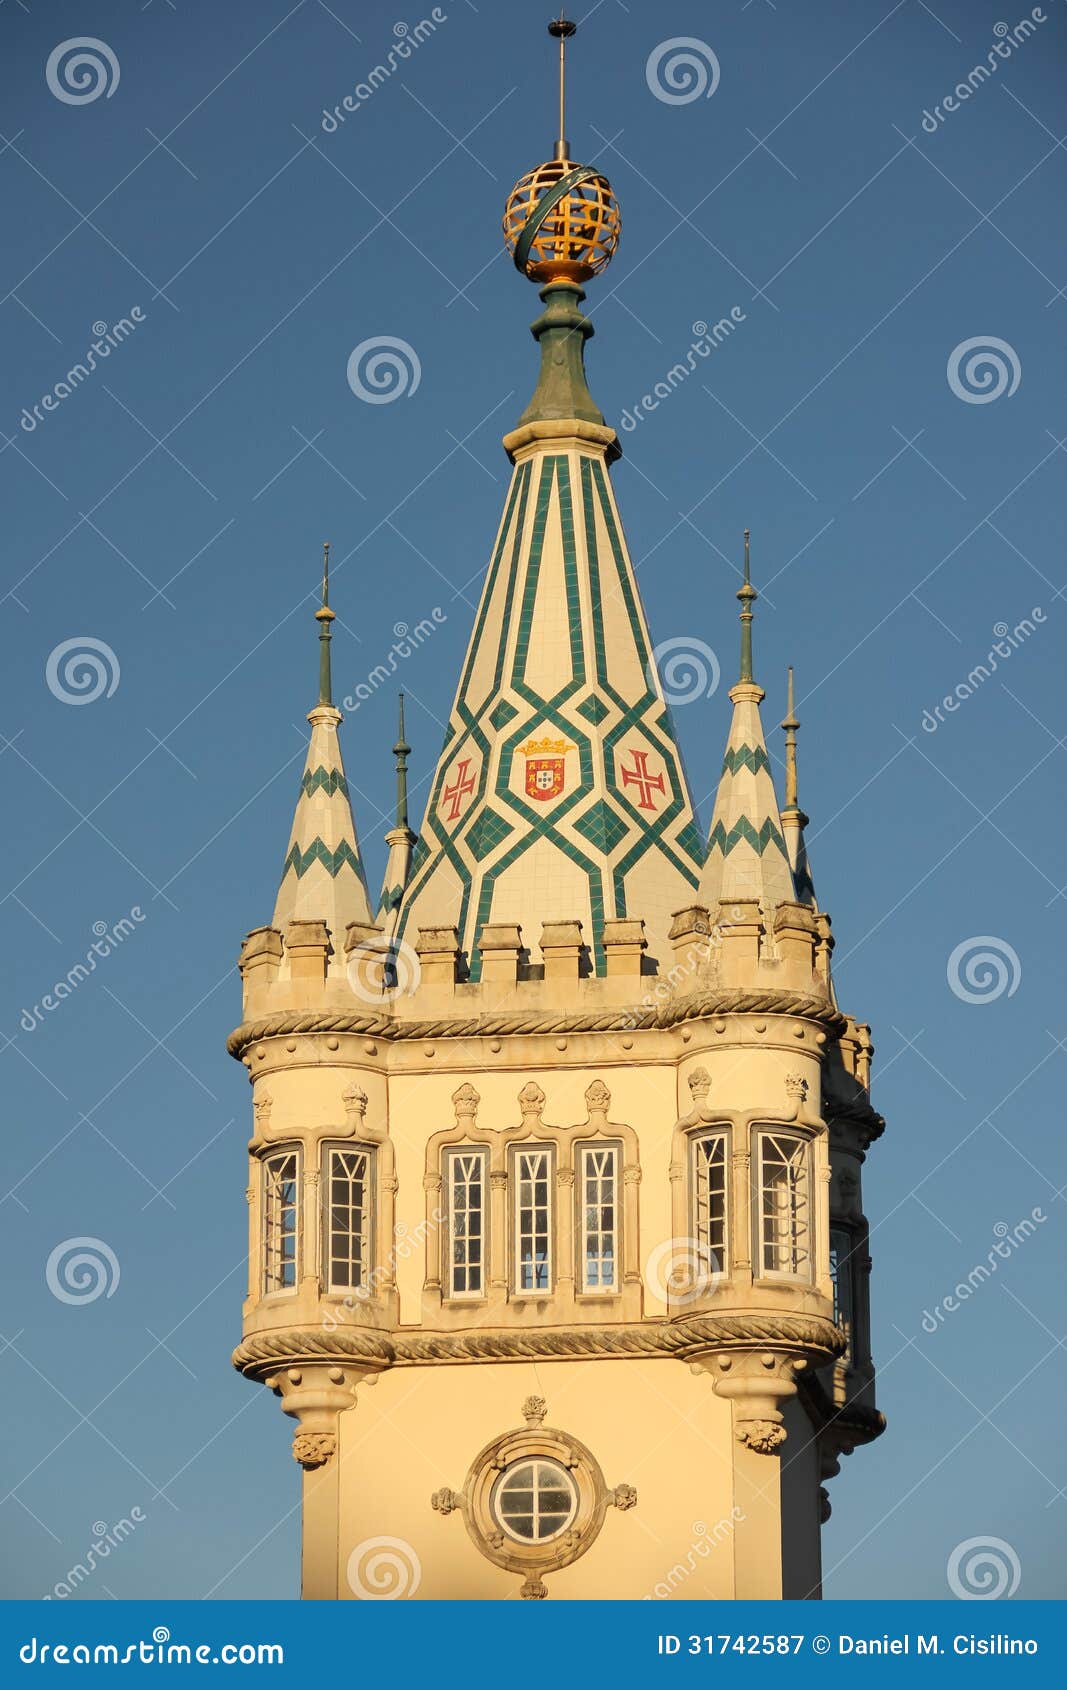 neo manueline style. town hall tower. sintra. portugal